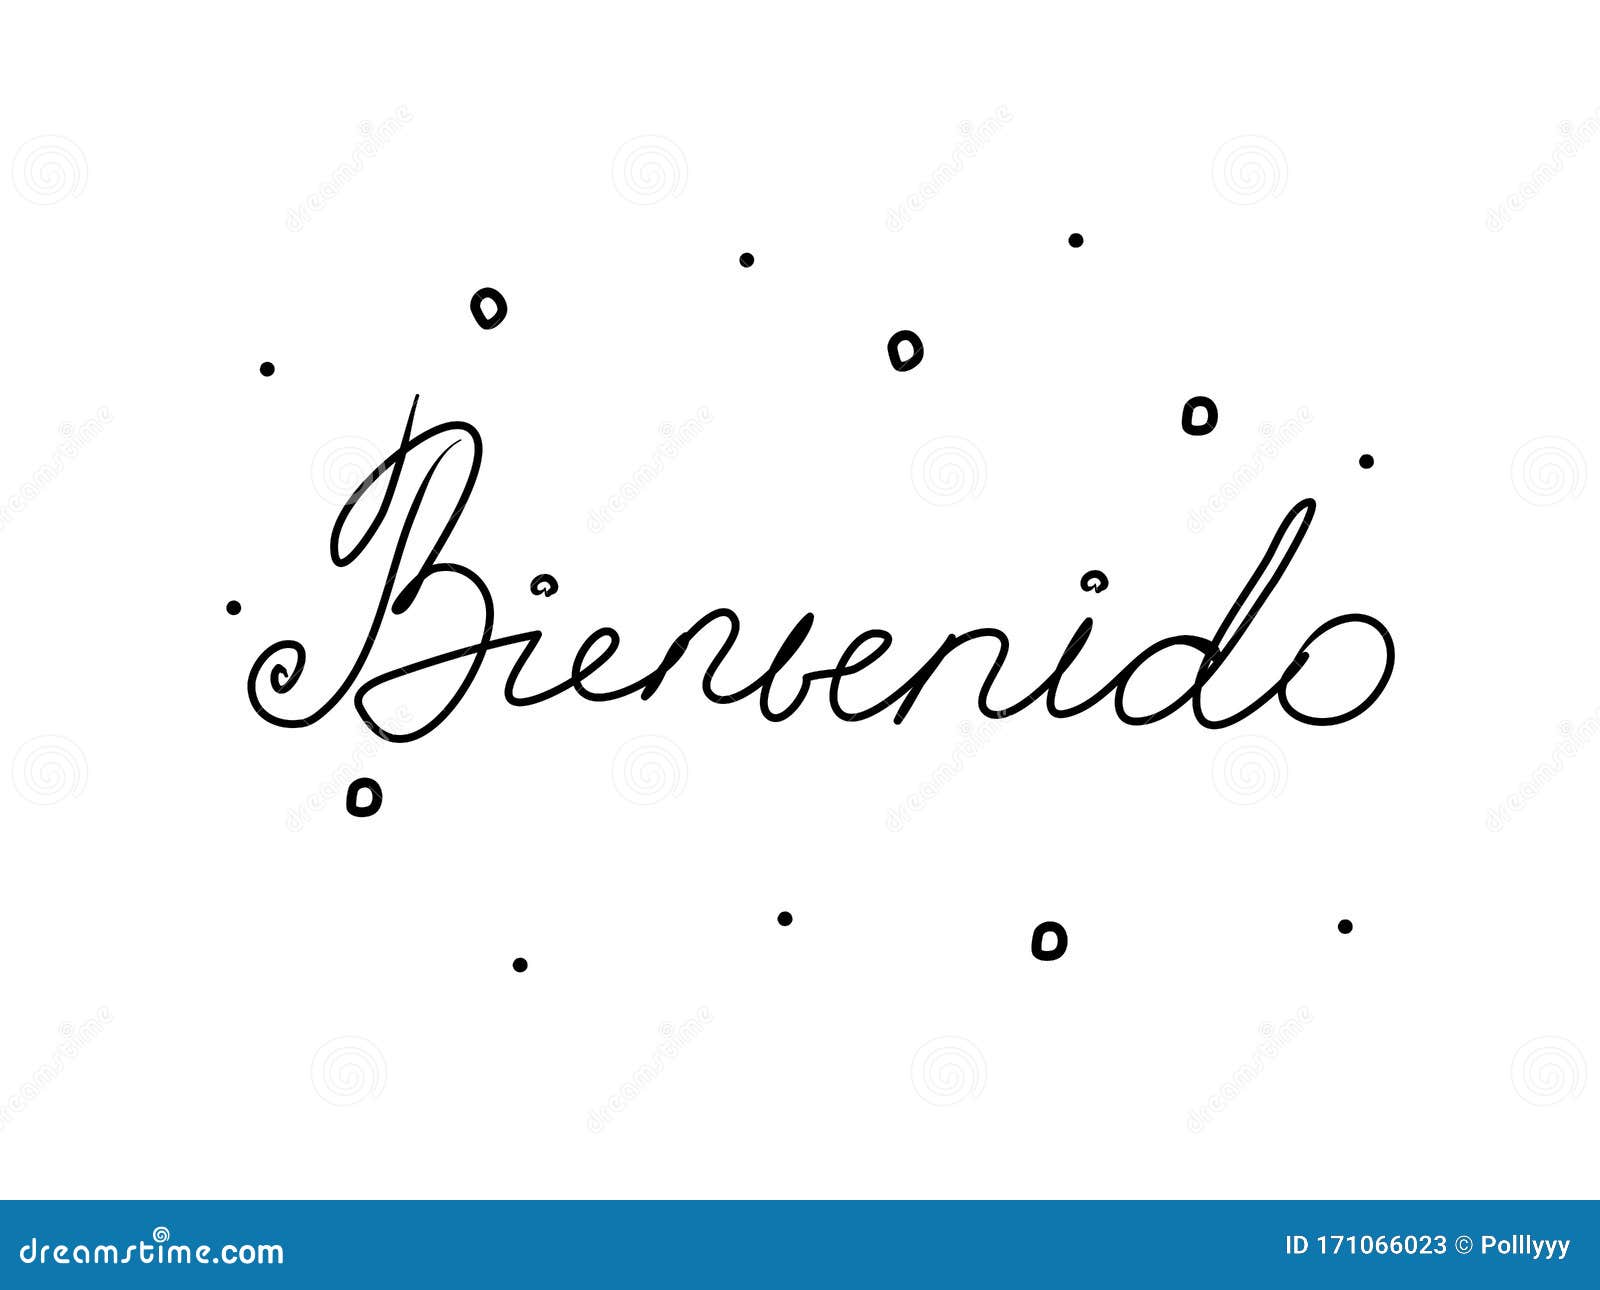 Bienvenido Welcome Spanish Text Lettering Vector: immagine vettoriale stock  (royalty free) 146506775